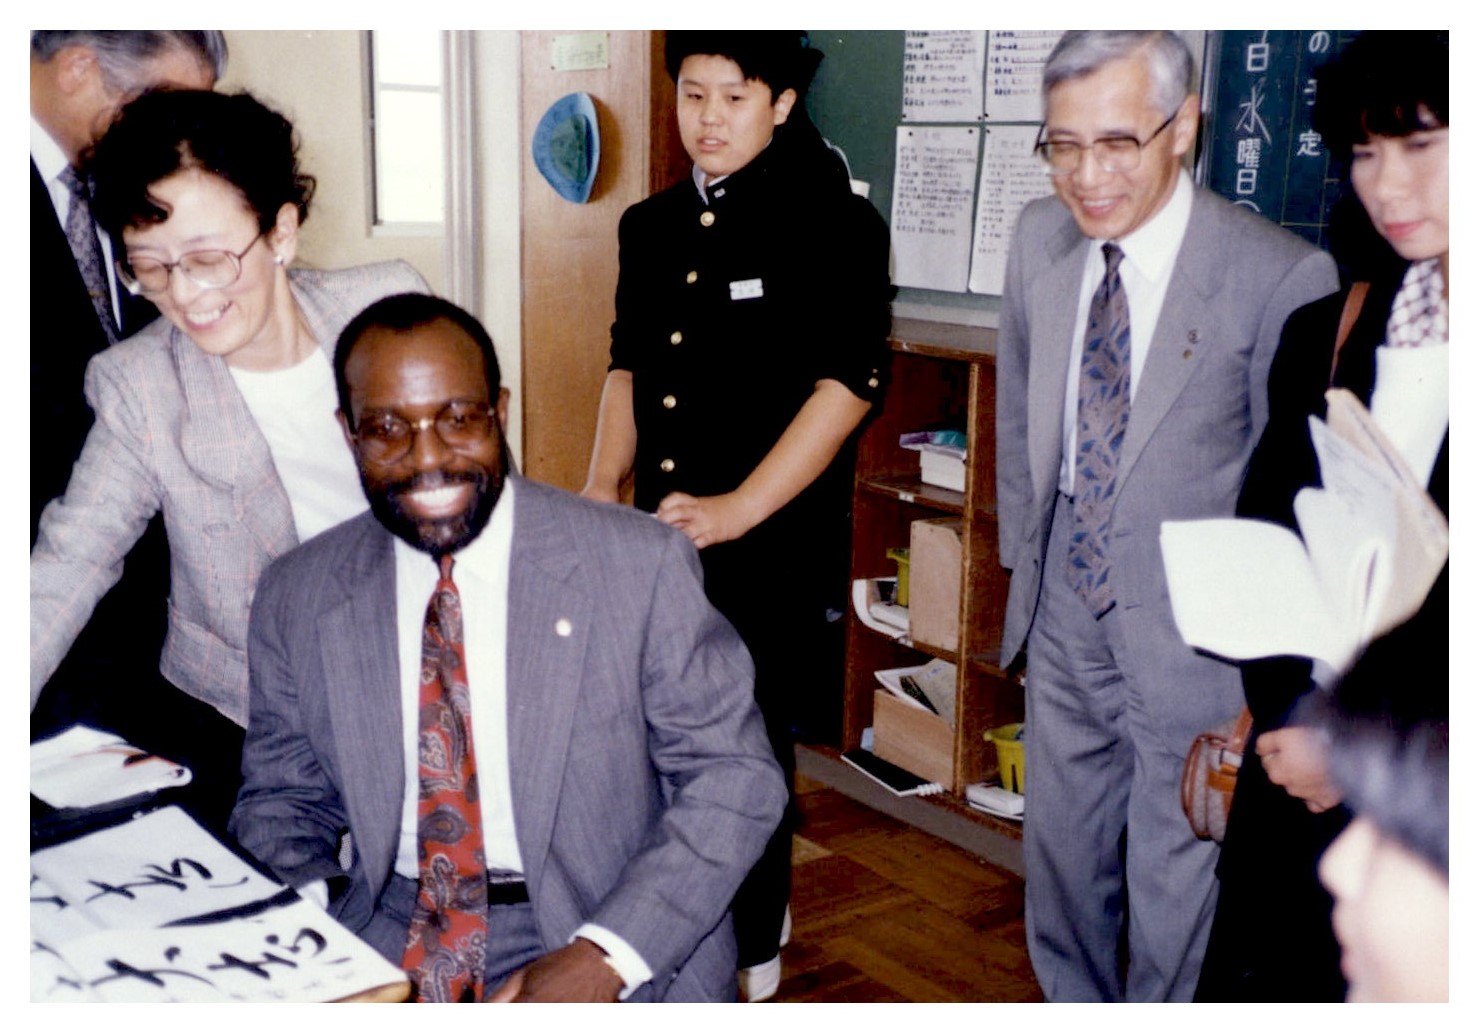 Charlie Nelms sits at a desk. Two women and two men stand nearby. On the desk are pieces of paper with Japanese character calligraphy.